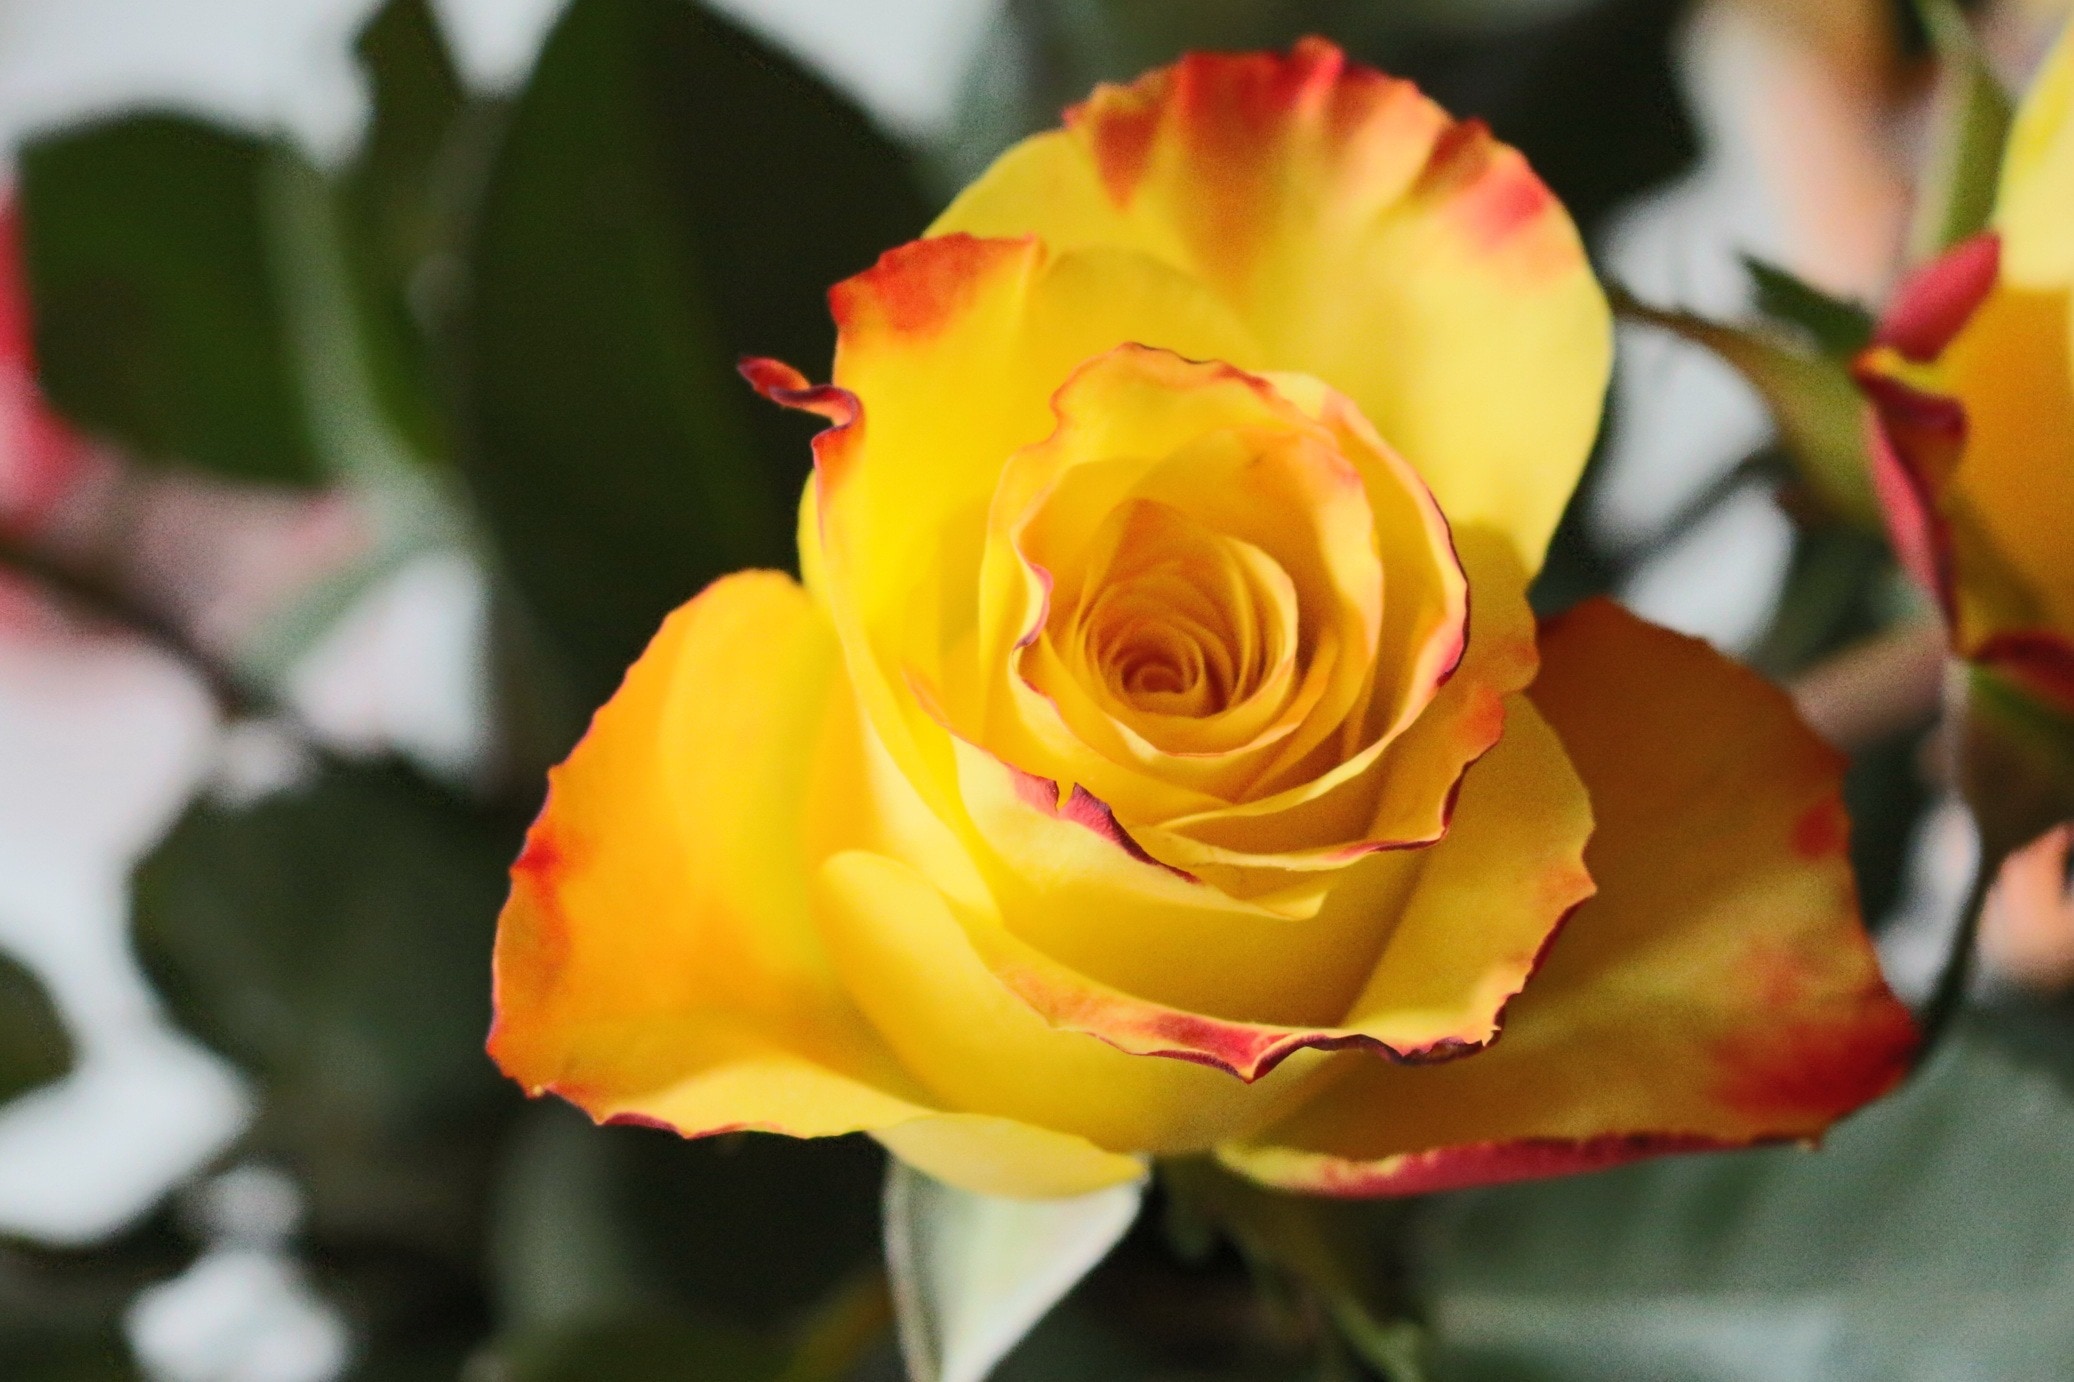 yellow and red rose in close up photography